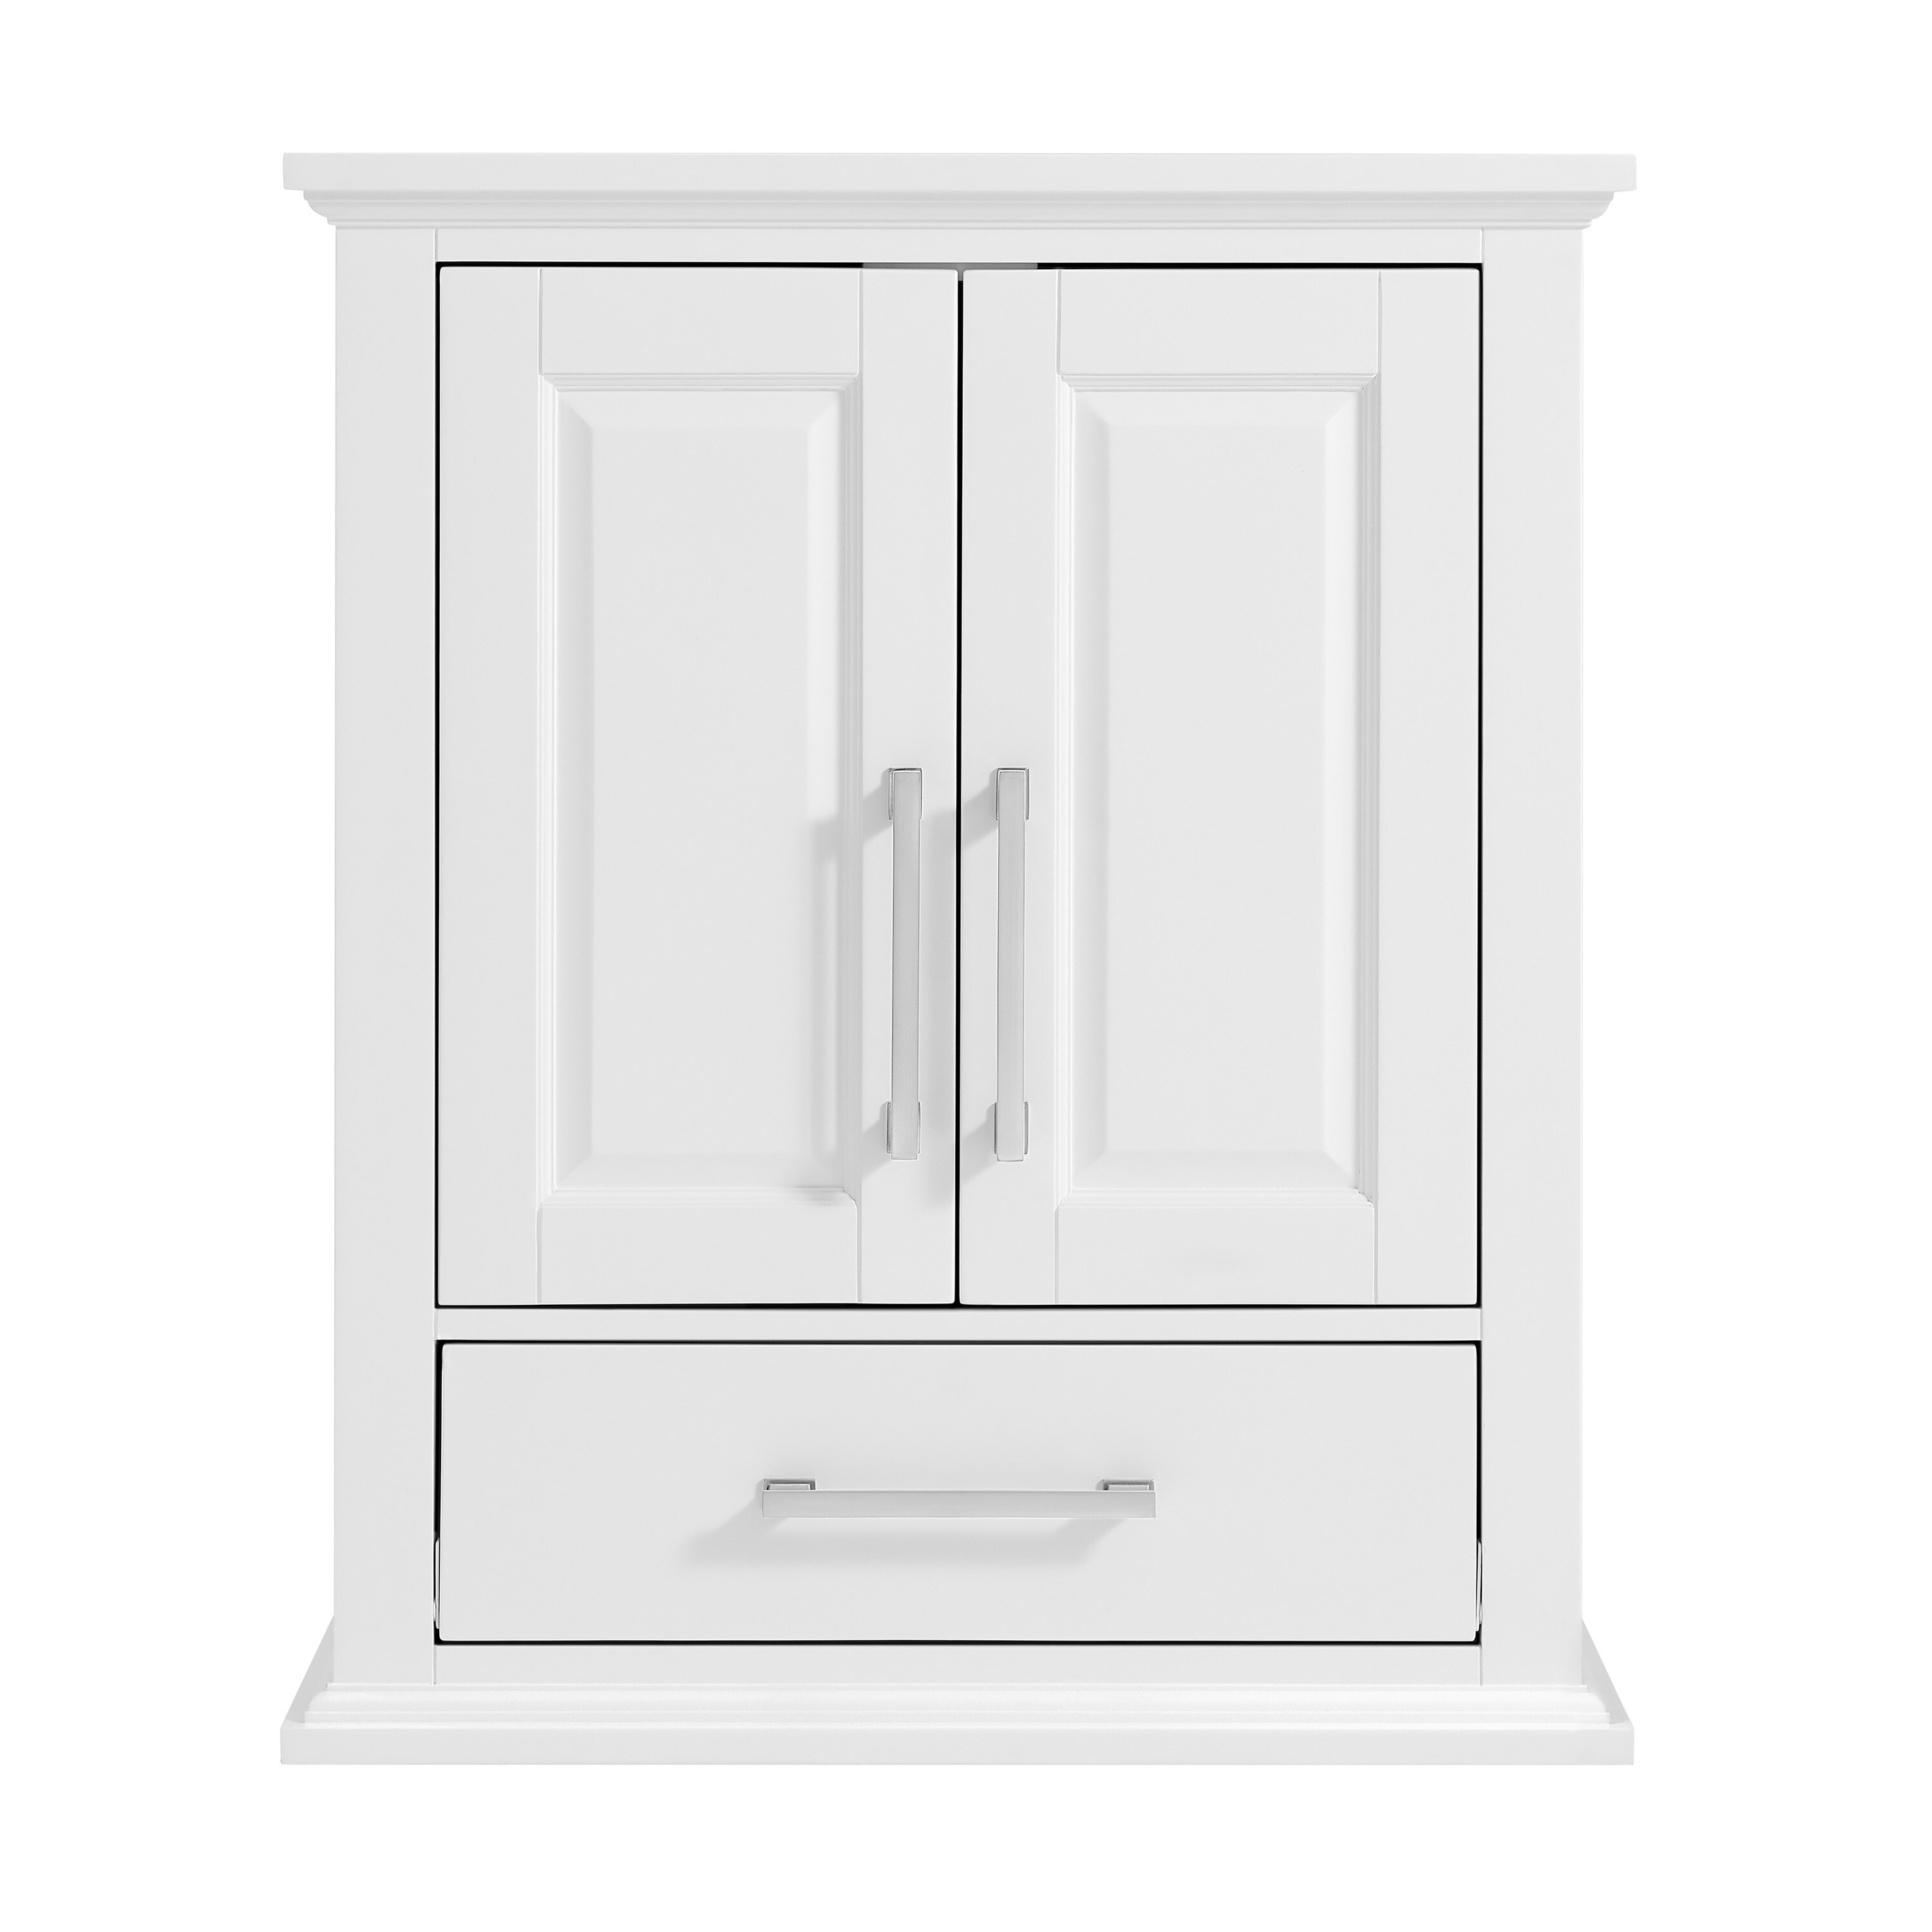 allen + roth Brookview 24-in x 29-in x 10-in White Soft Close Bathroom ...